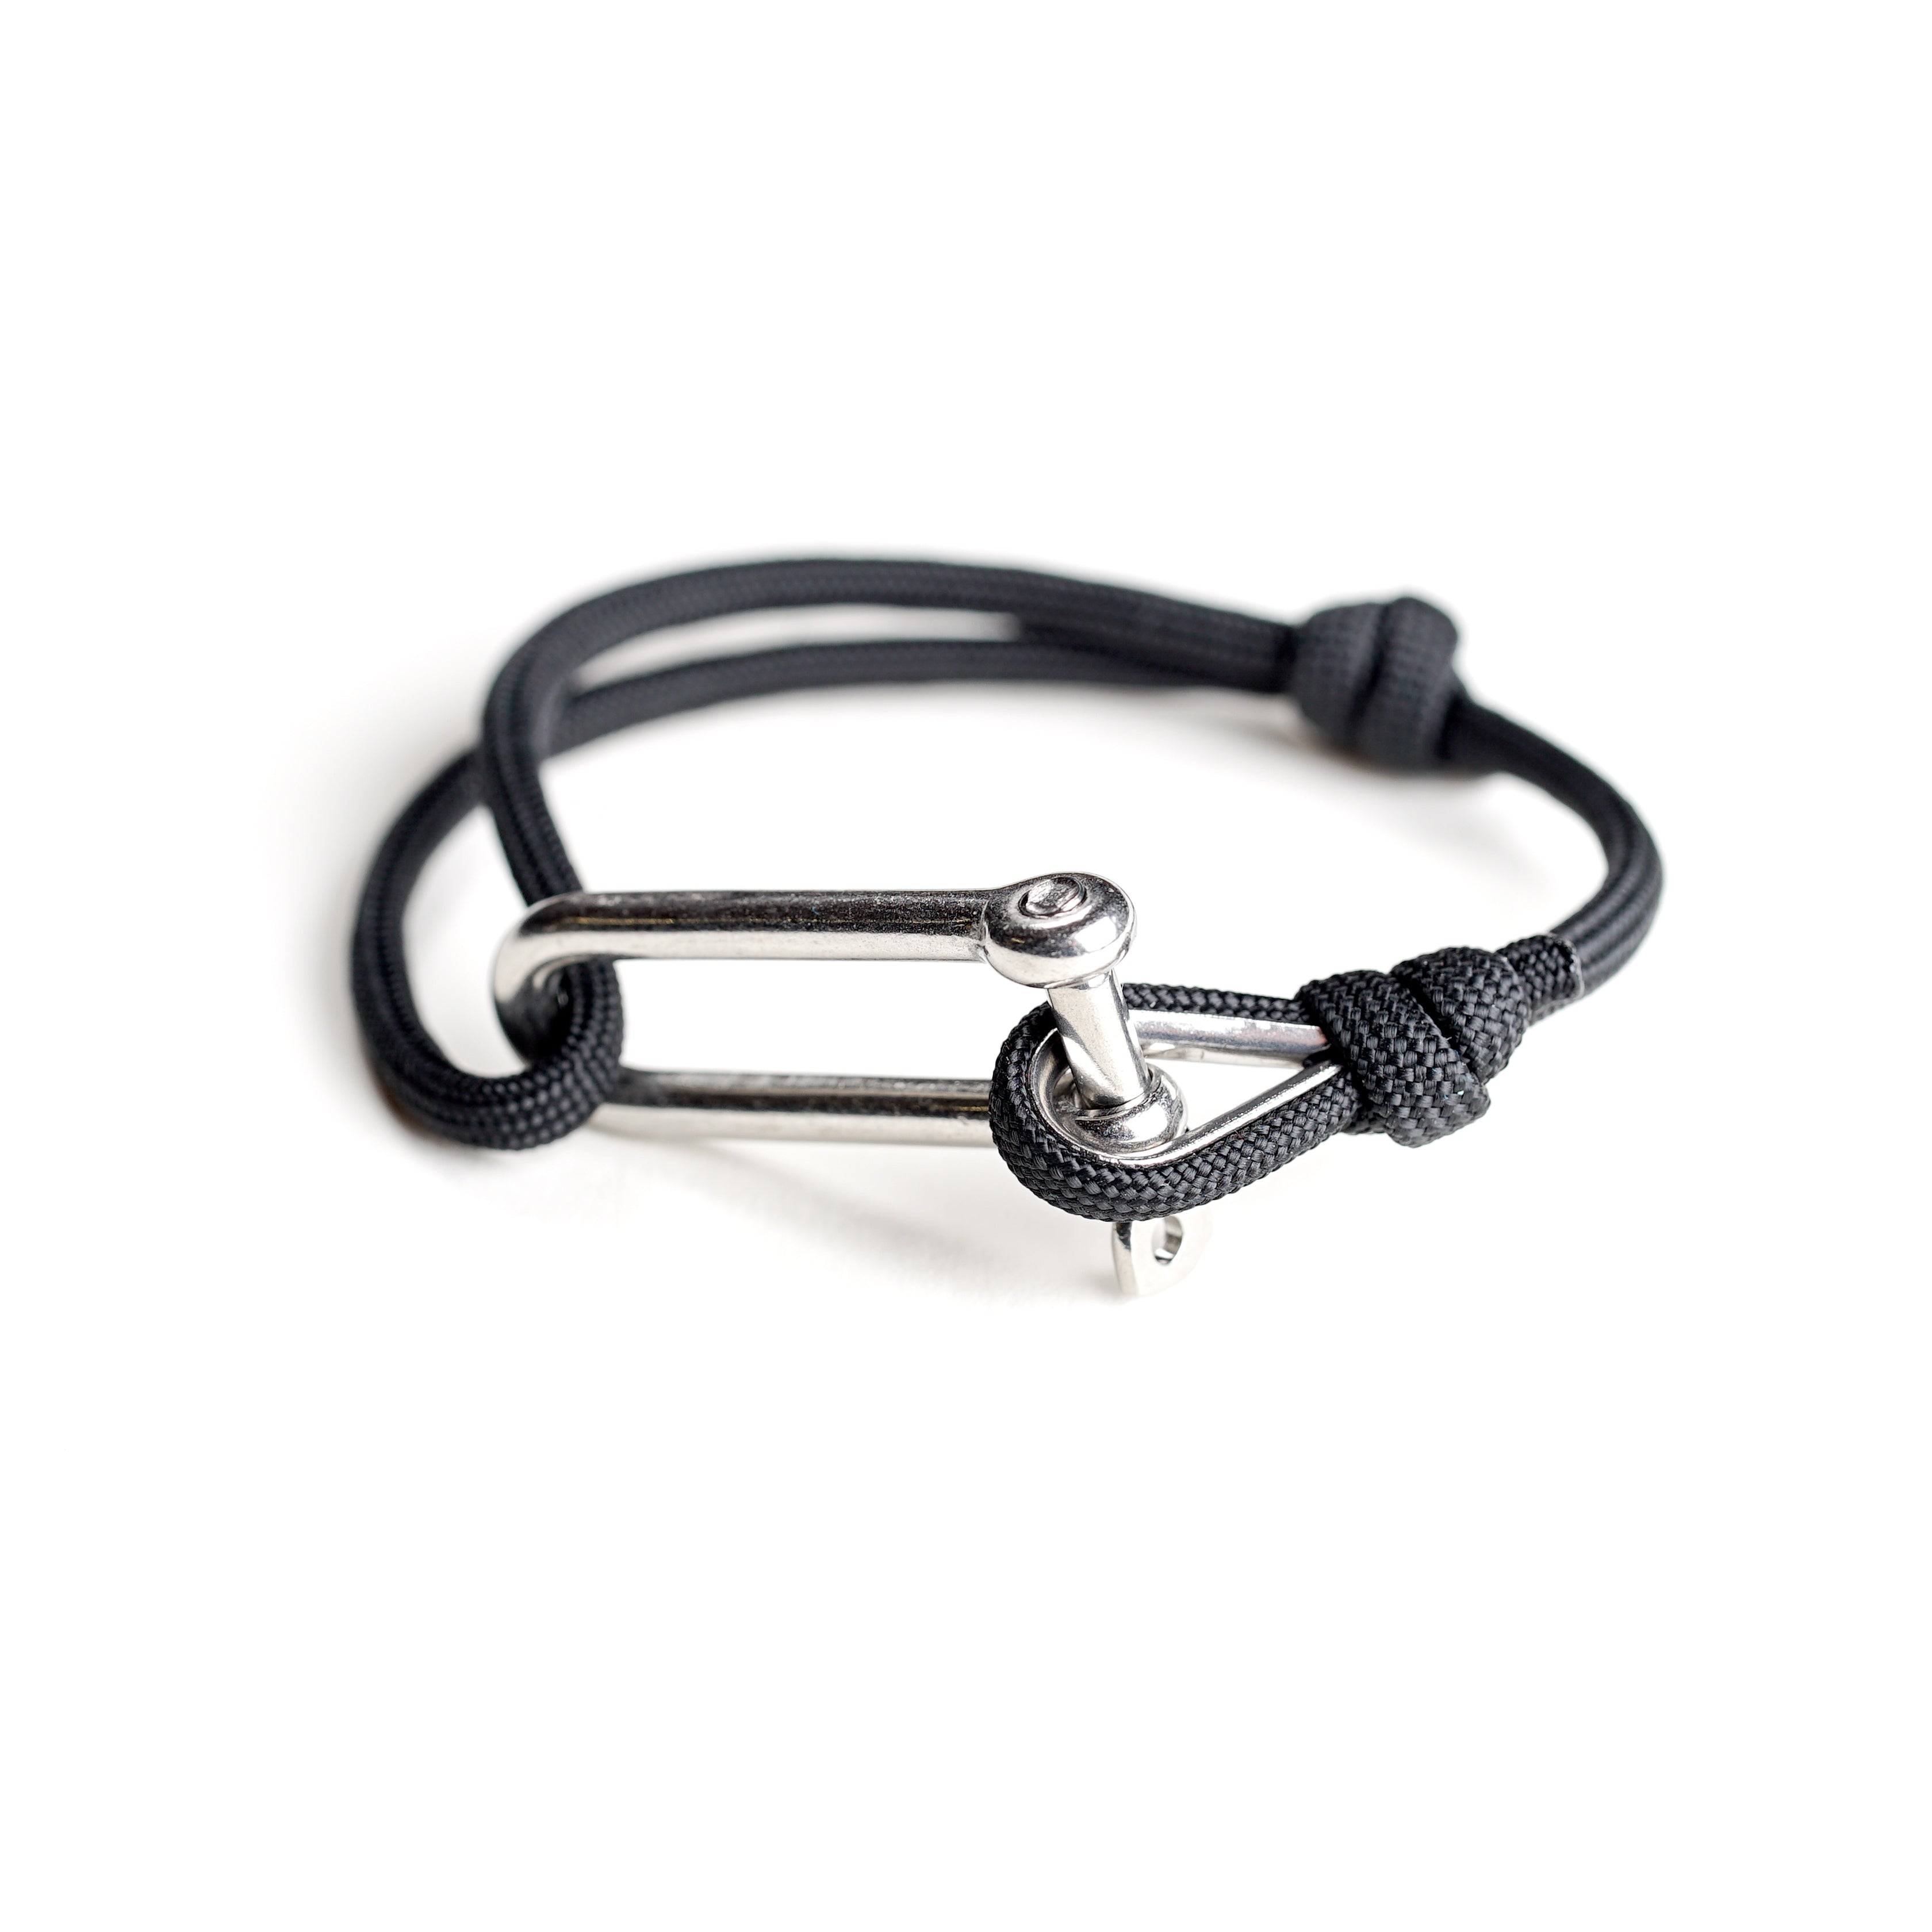 Paracord Nautical Bracelet with Stainless Steel Shackle - Black